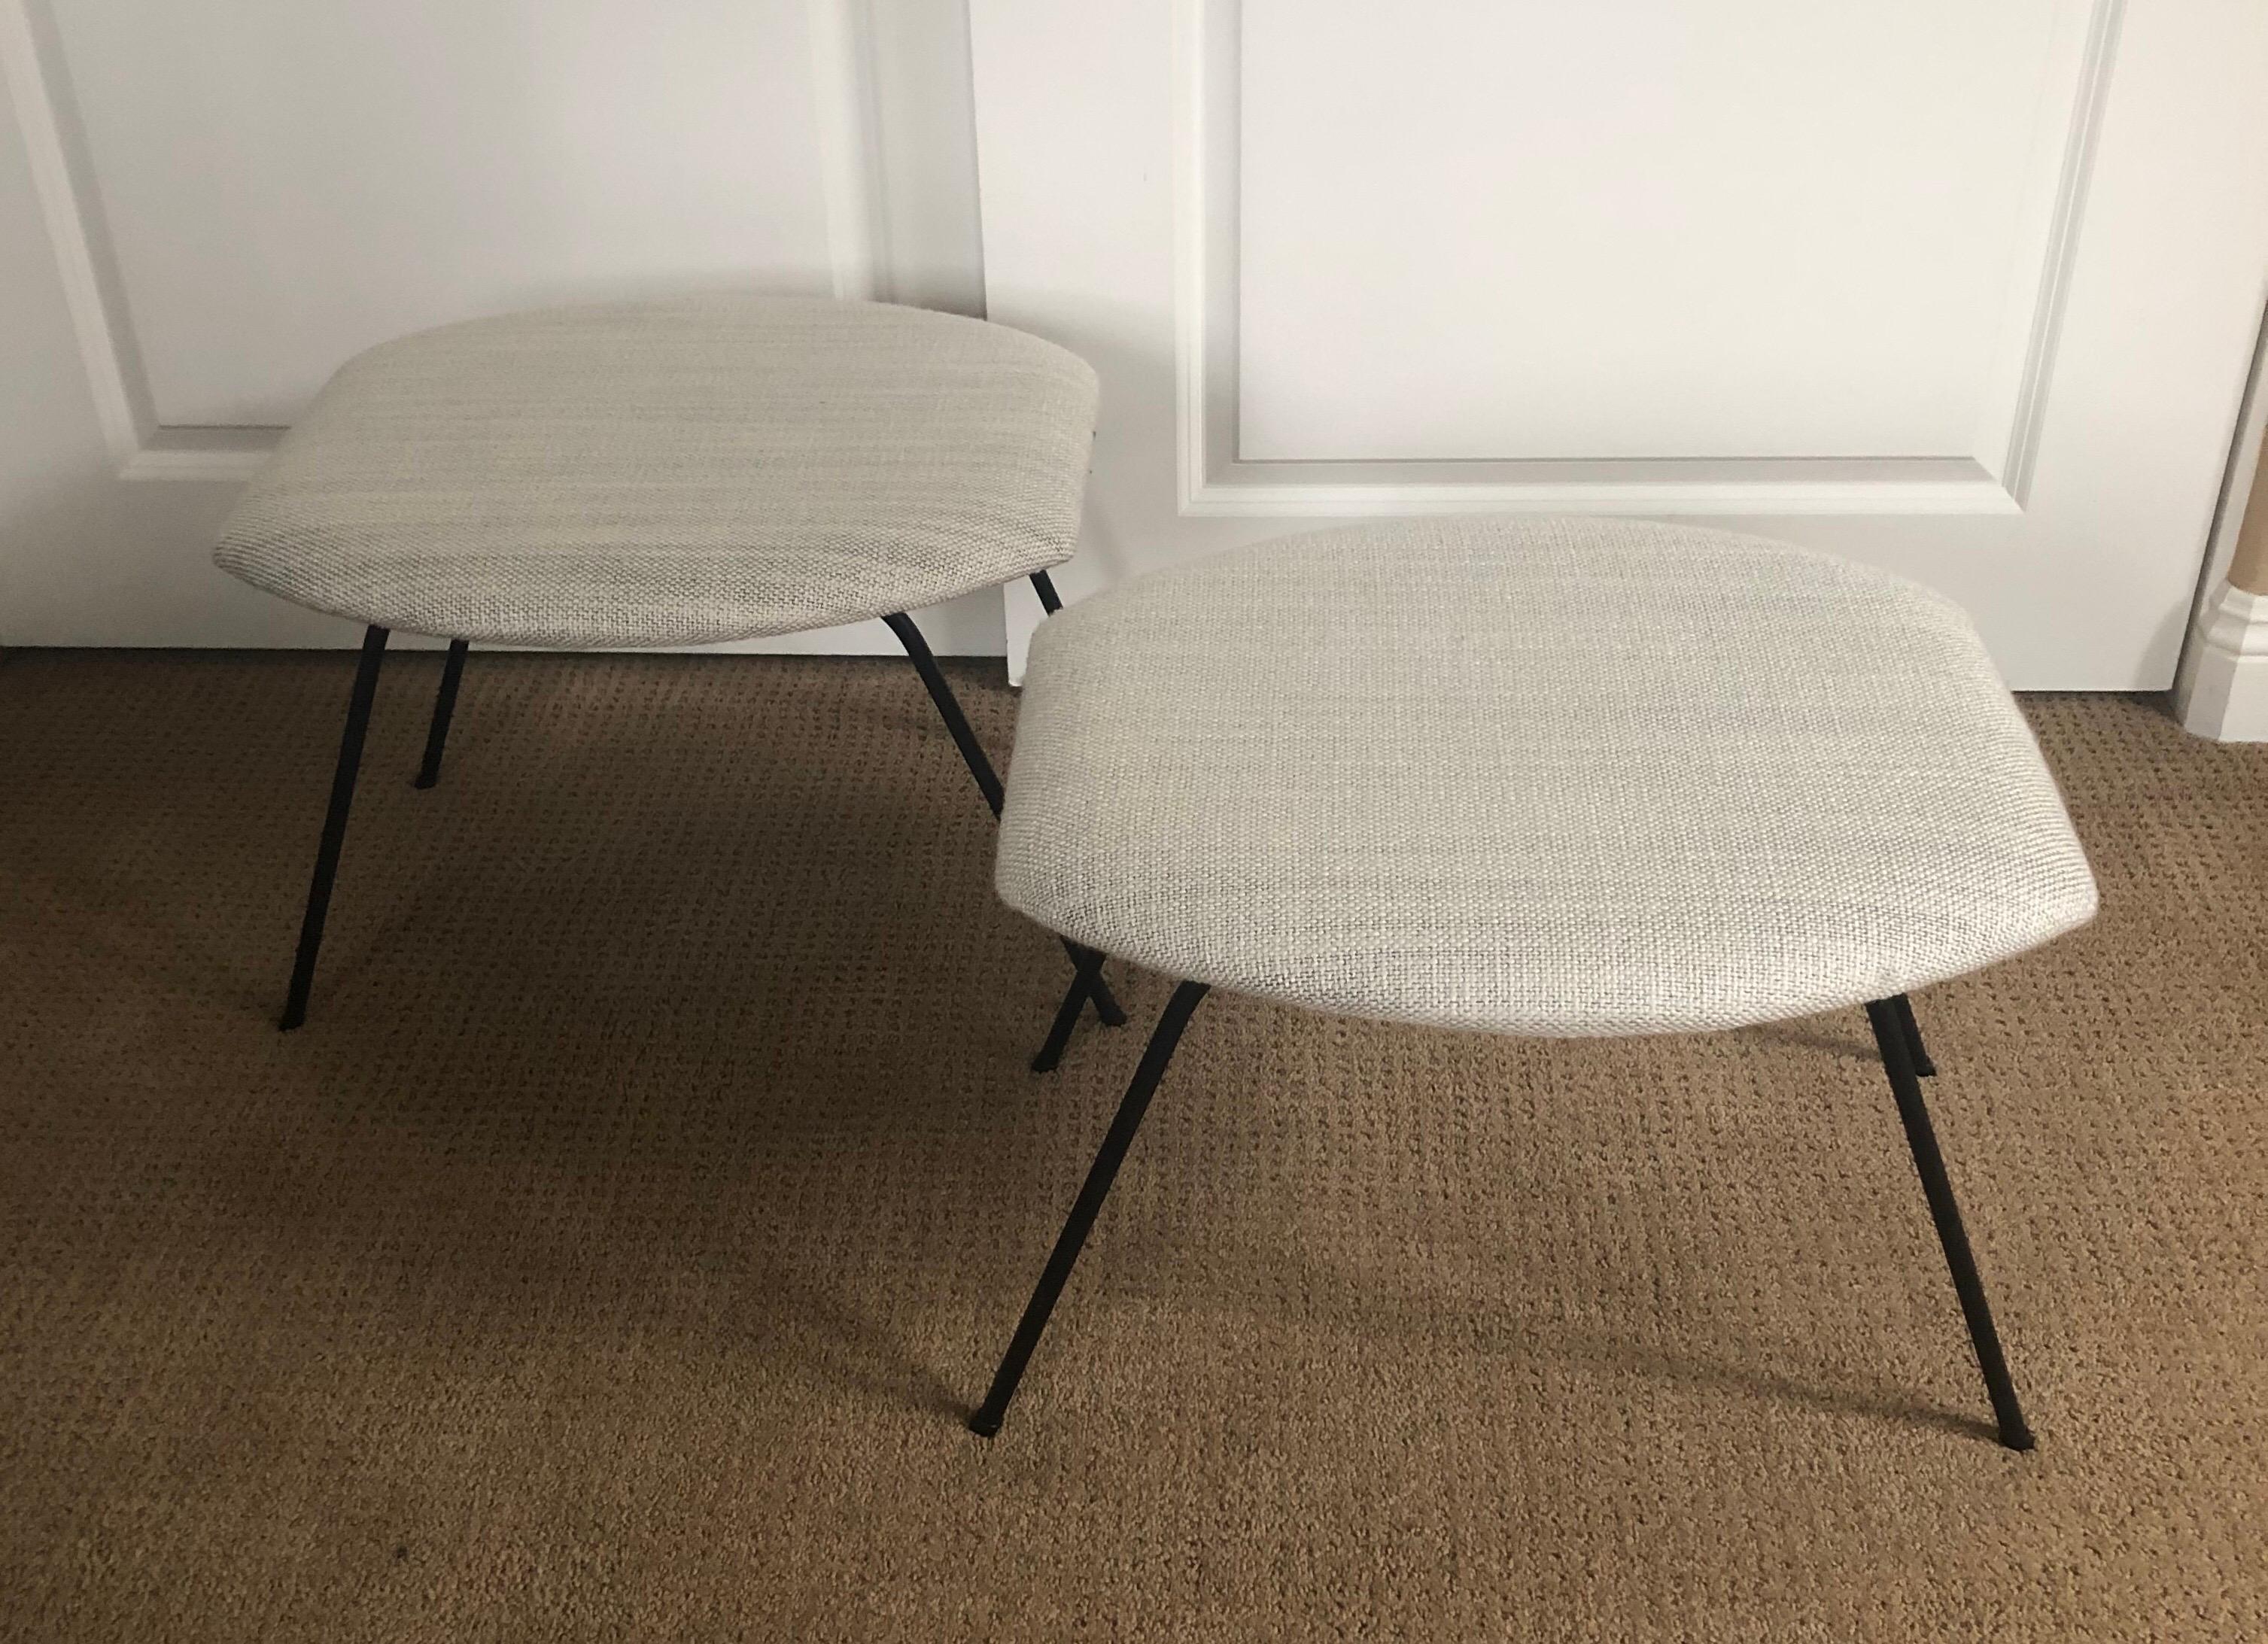 Pair of atomic age iron base ottomans / benches by Joseph Cicchelli, circa 1950s. - Great California design on this pair of freshly reupholstered ottomans with a cream linen fabric. The legs are solid iron pipping and have been resprayed in matte